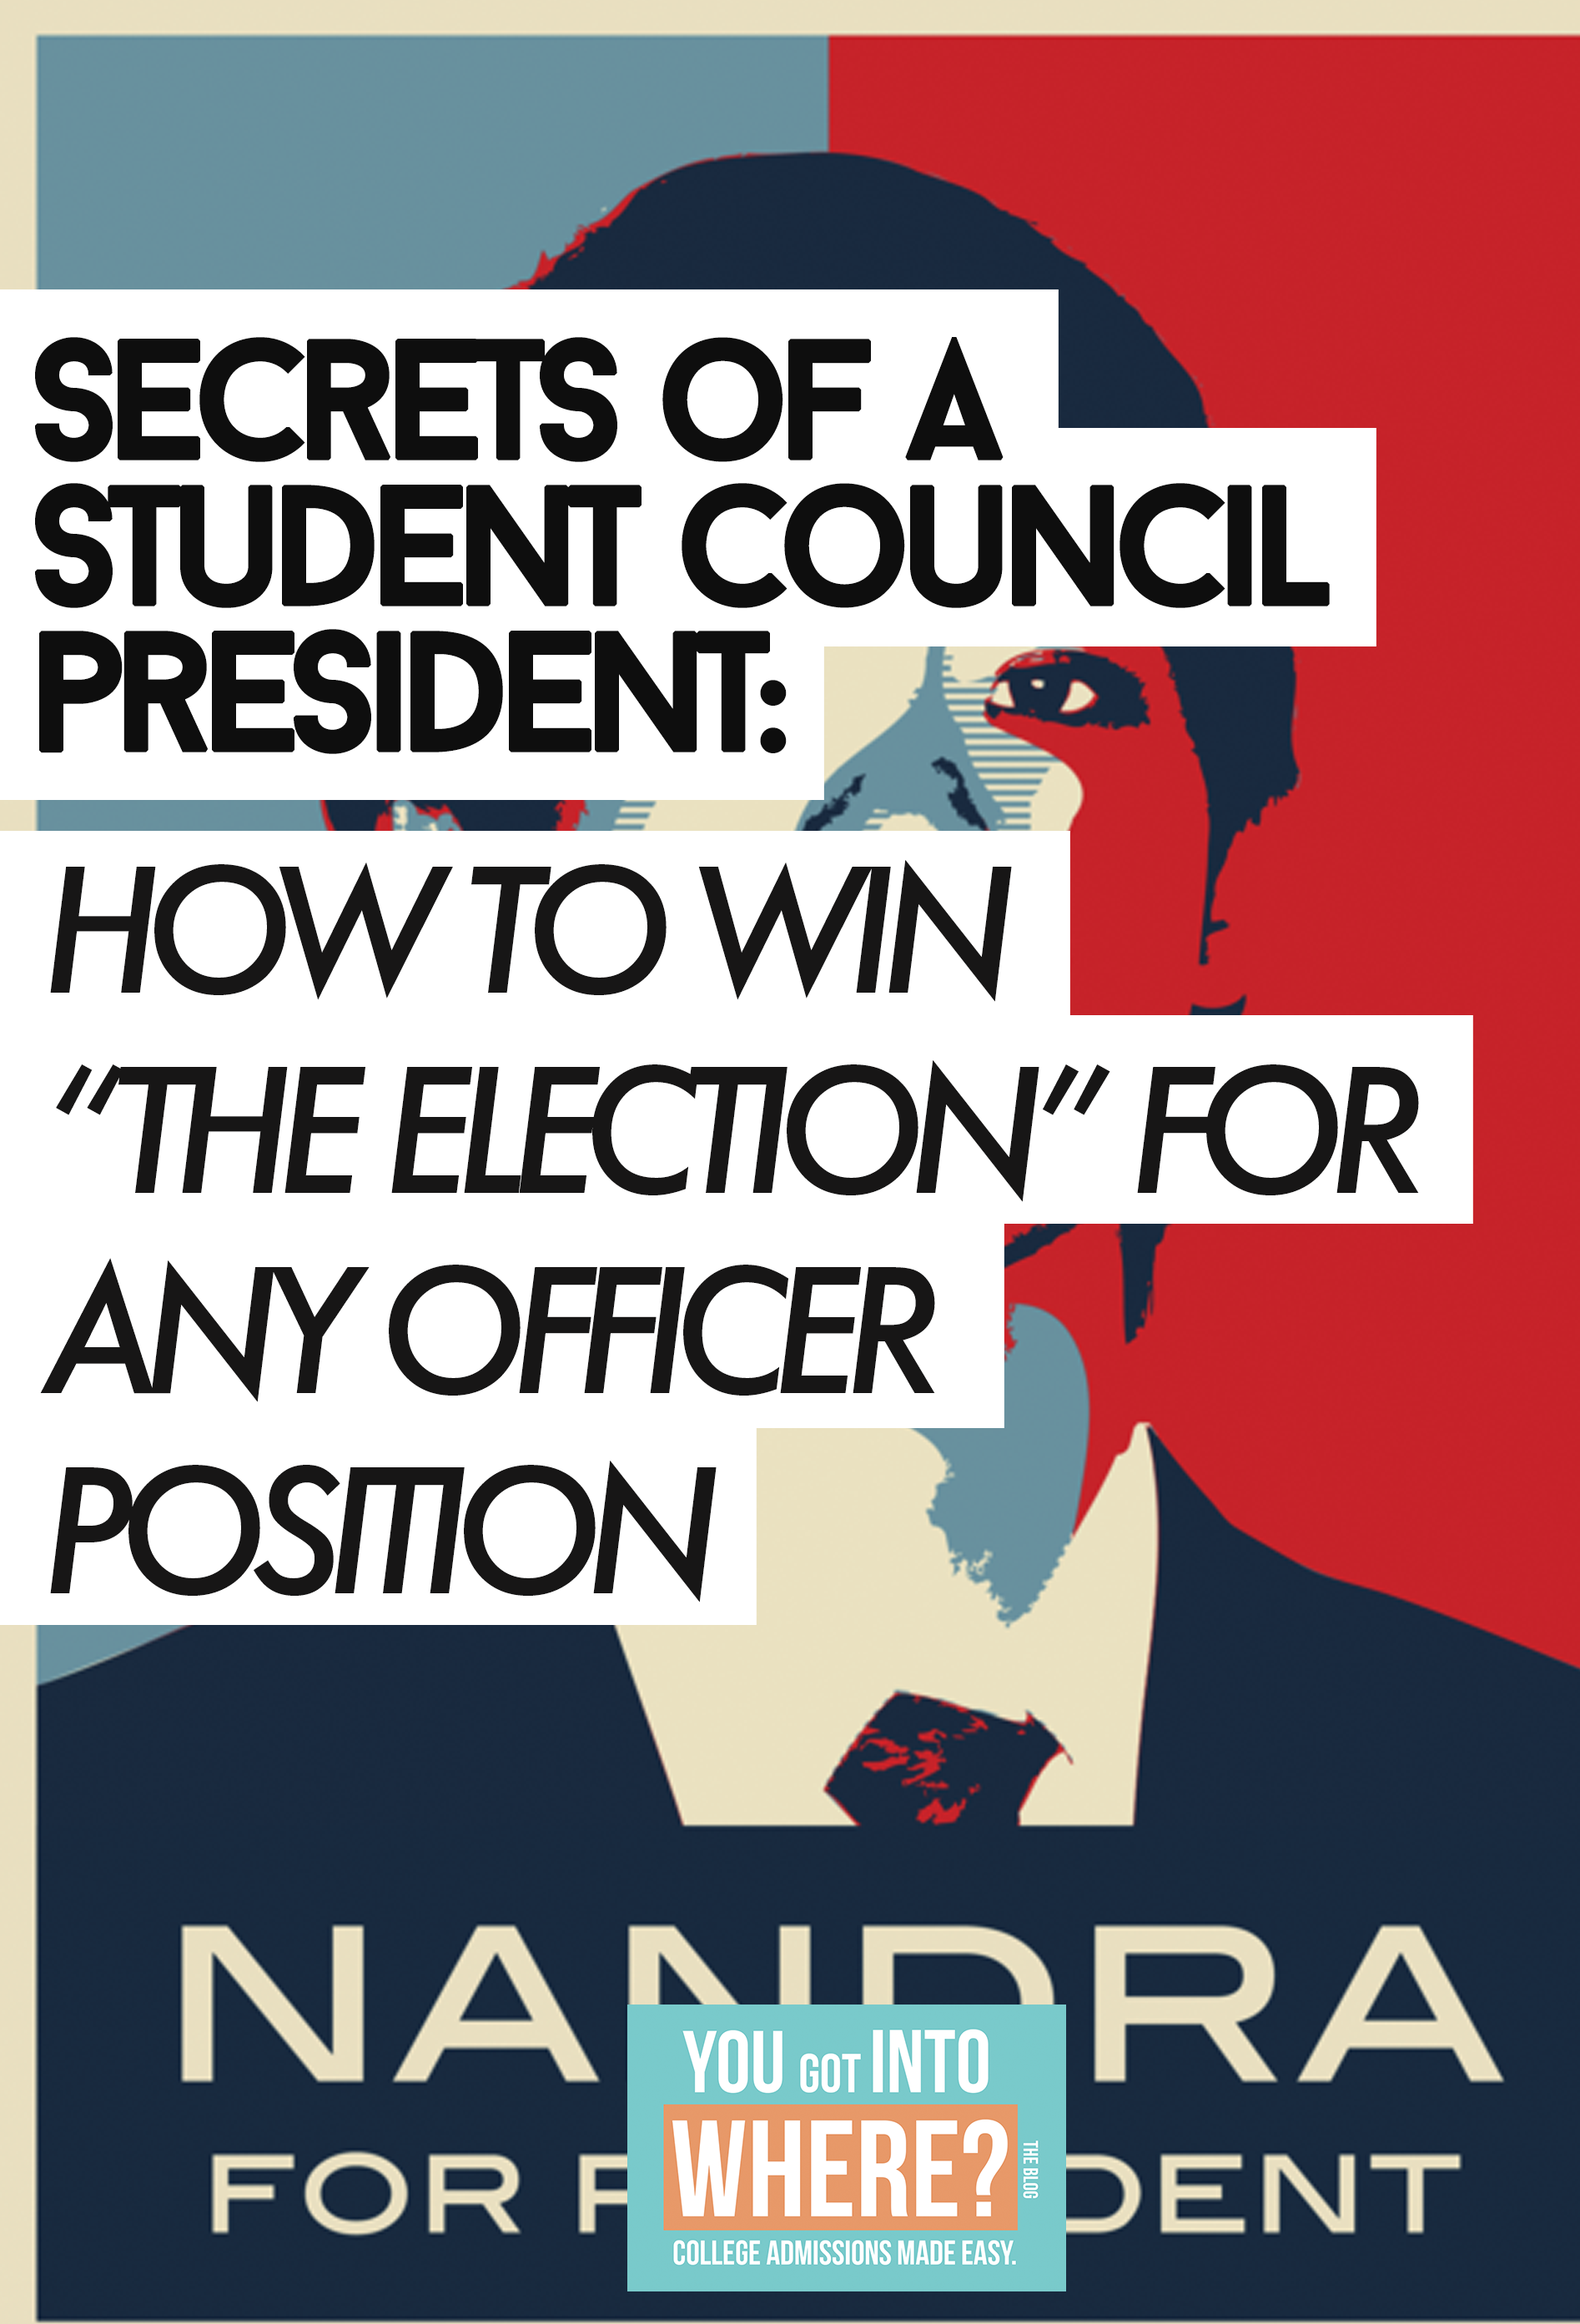 Secrets of a Student Council President: How to Win "The Election